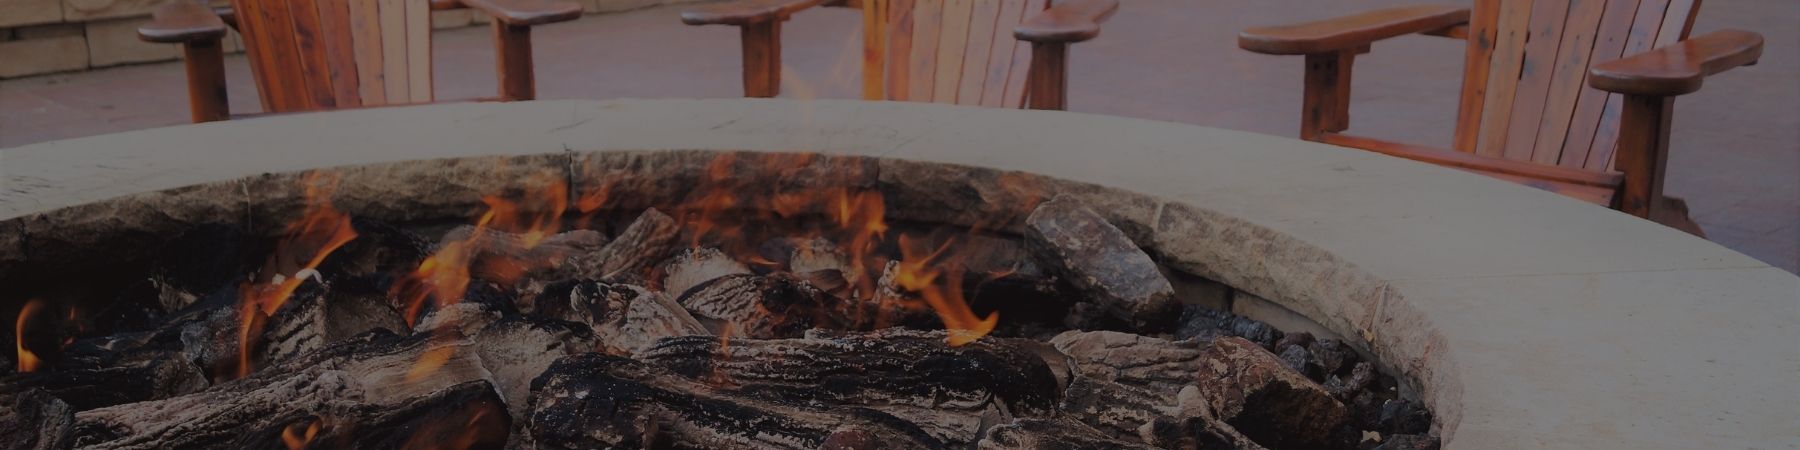 Open Air Burning Halton Hills, Are Propane Fire Pits Legal In Ontario Ca